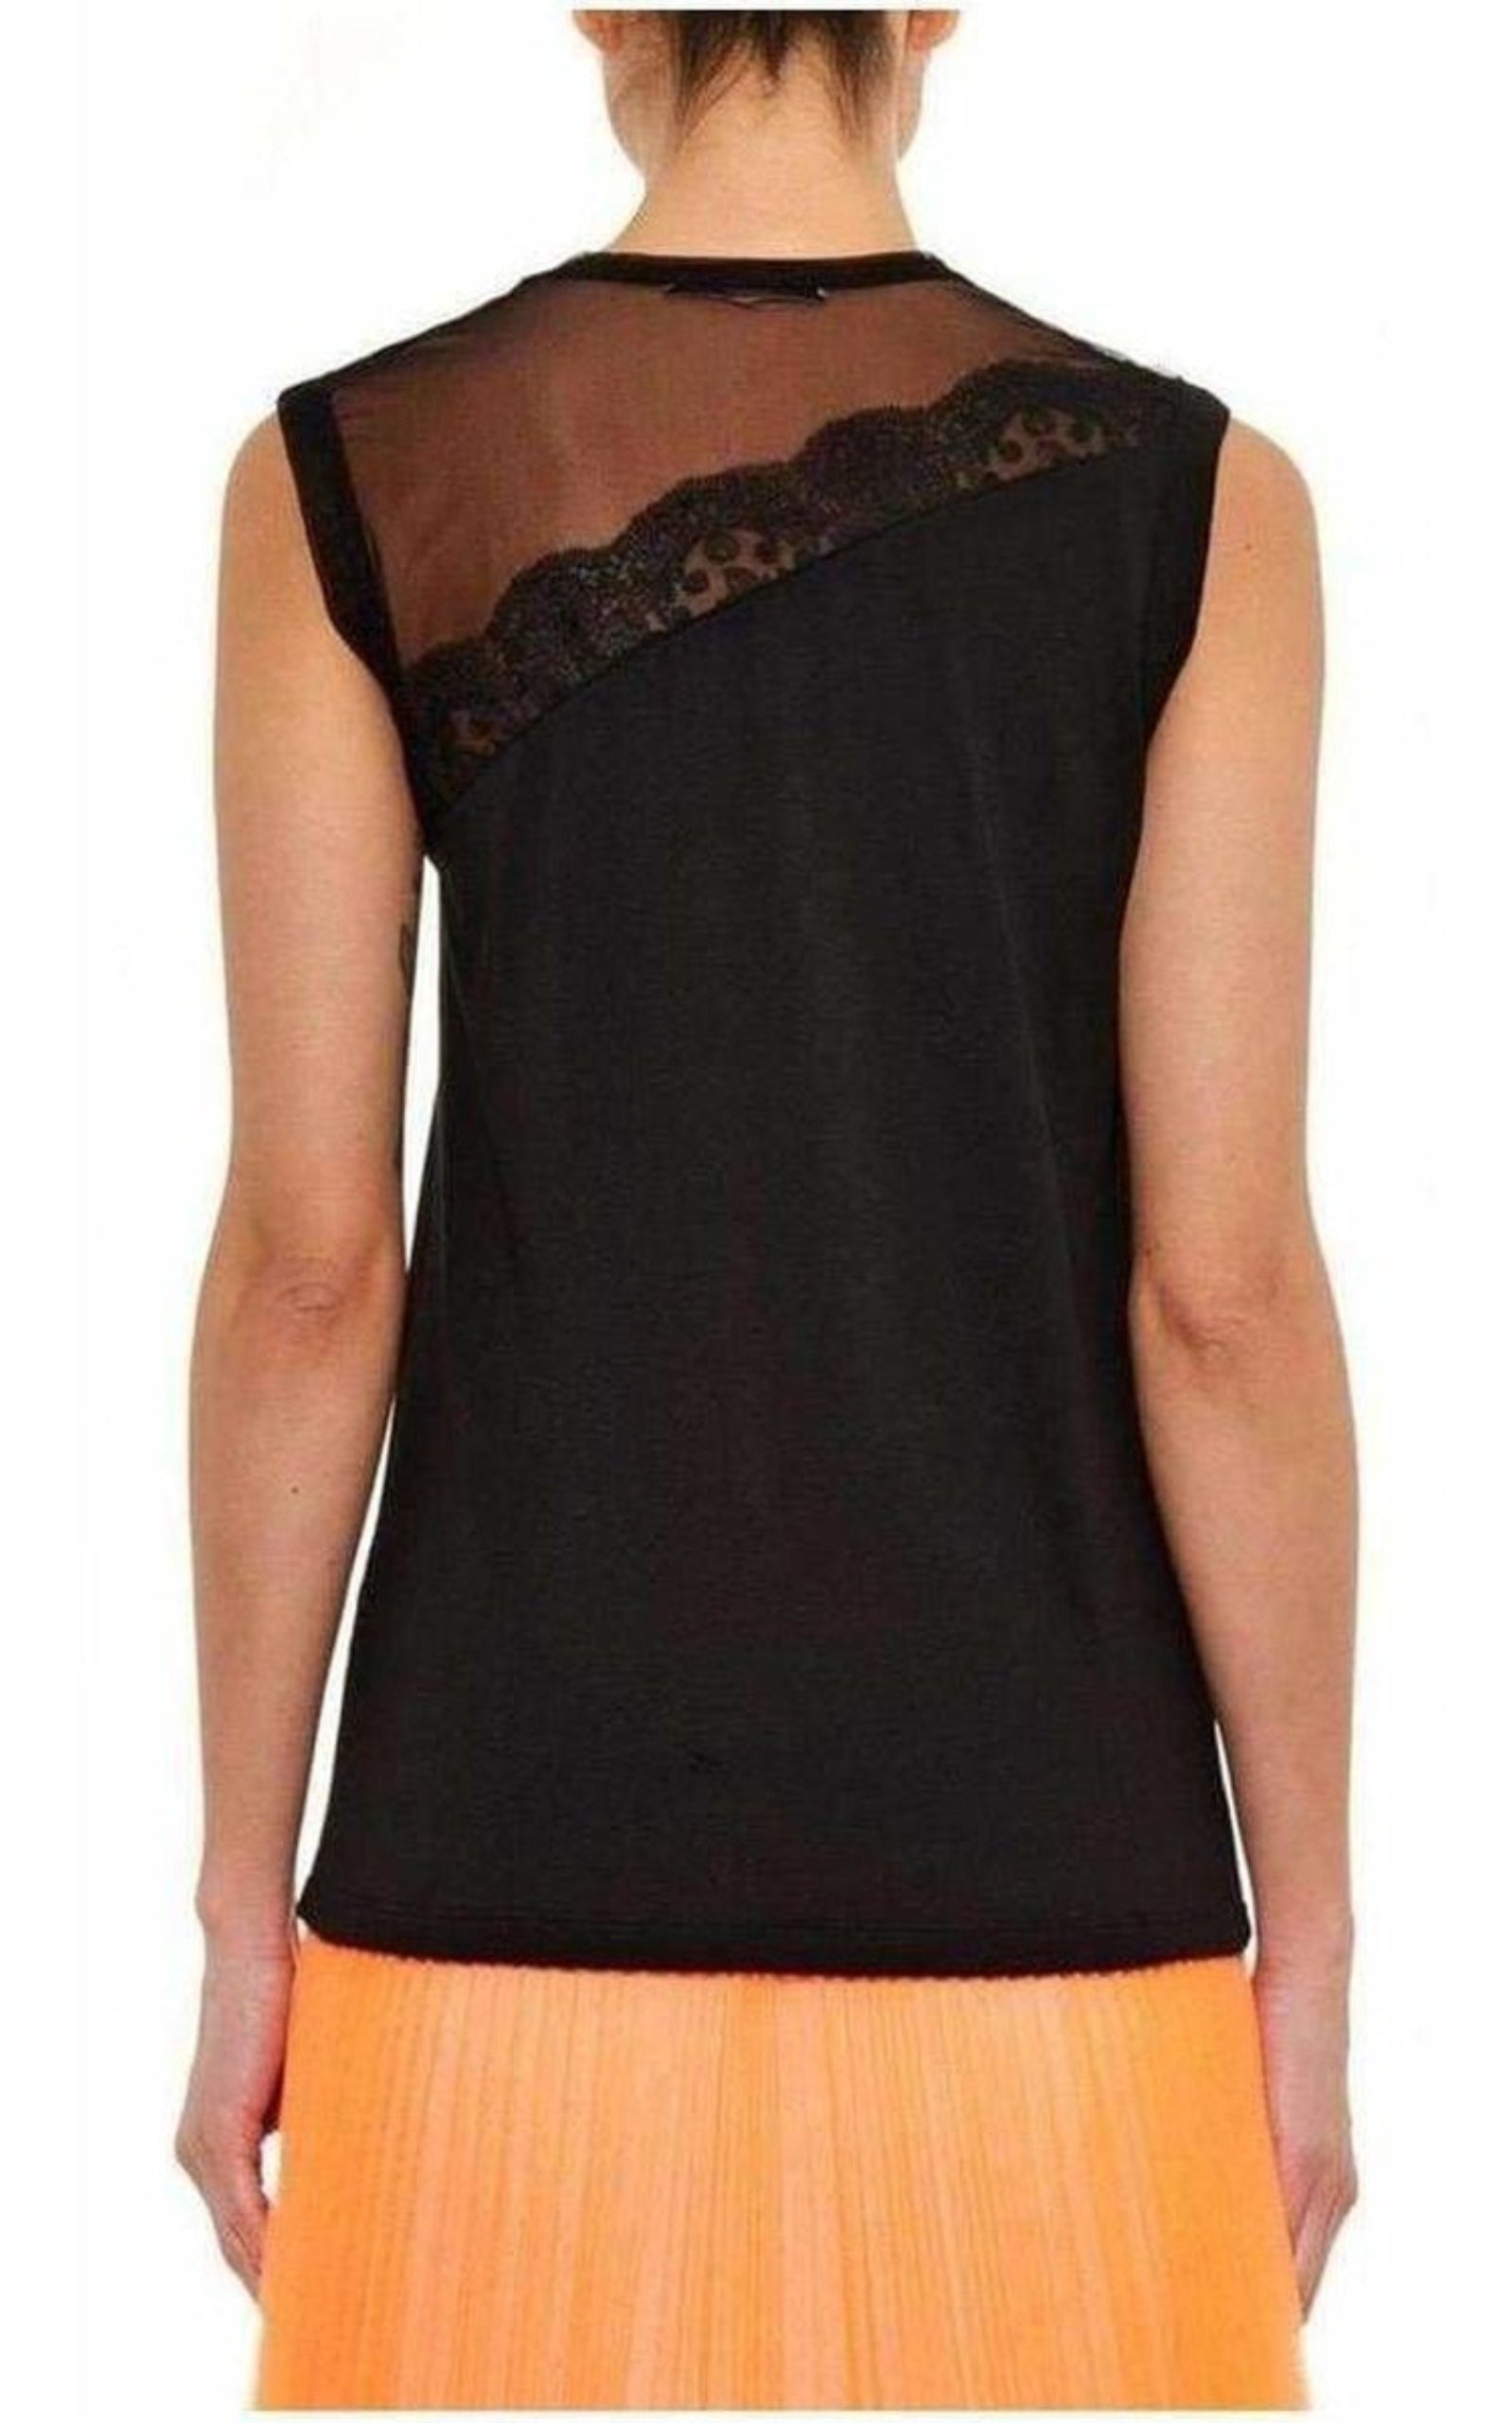  Christopher KaneMesh and Lace Insert Black Top - Runway Catalog